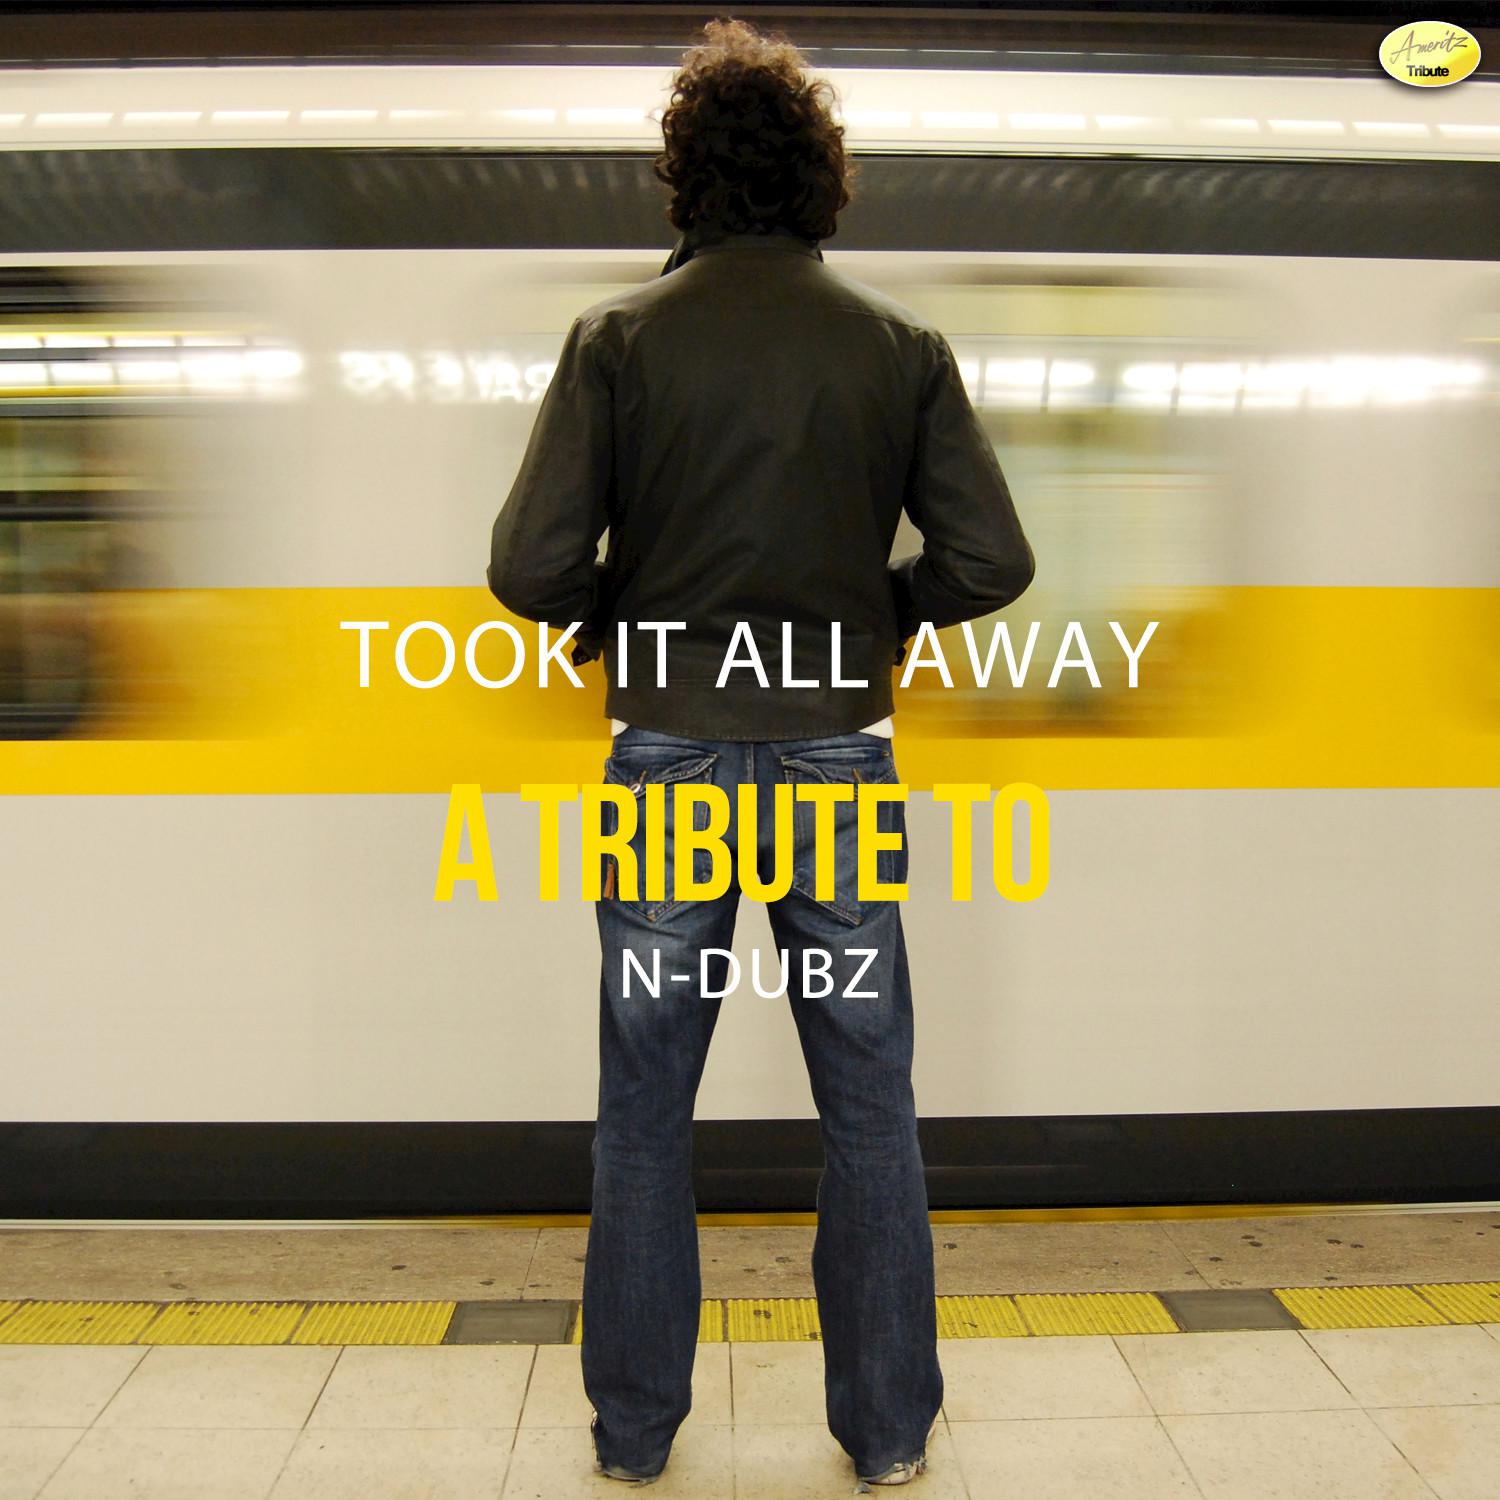 Took It All Away - A Tribute to N-Dubz